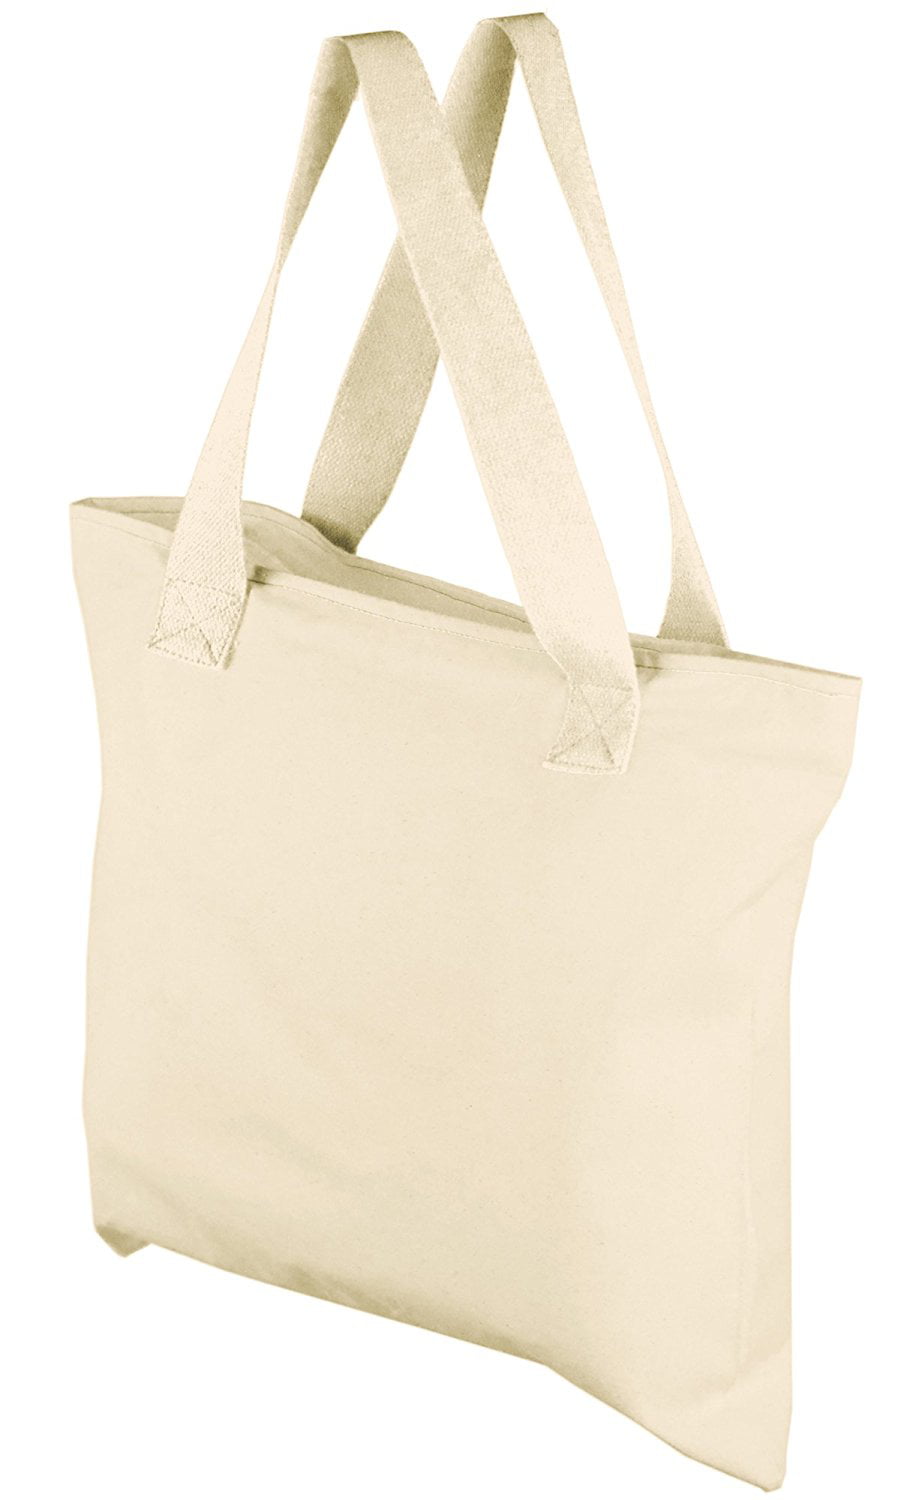 Mato & Hash - Canvas Tote Bag - CREATIVITY Bag KID Tested & Approved ...